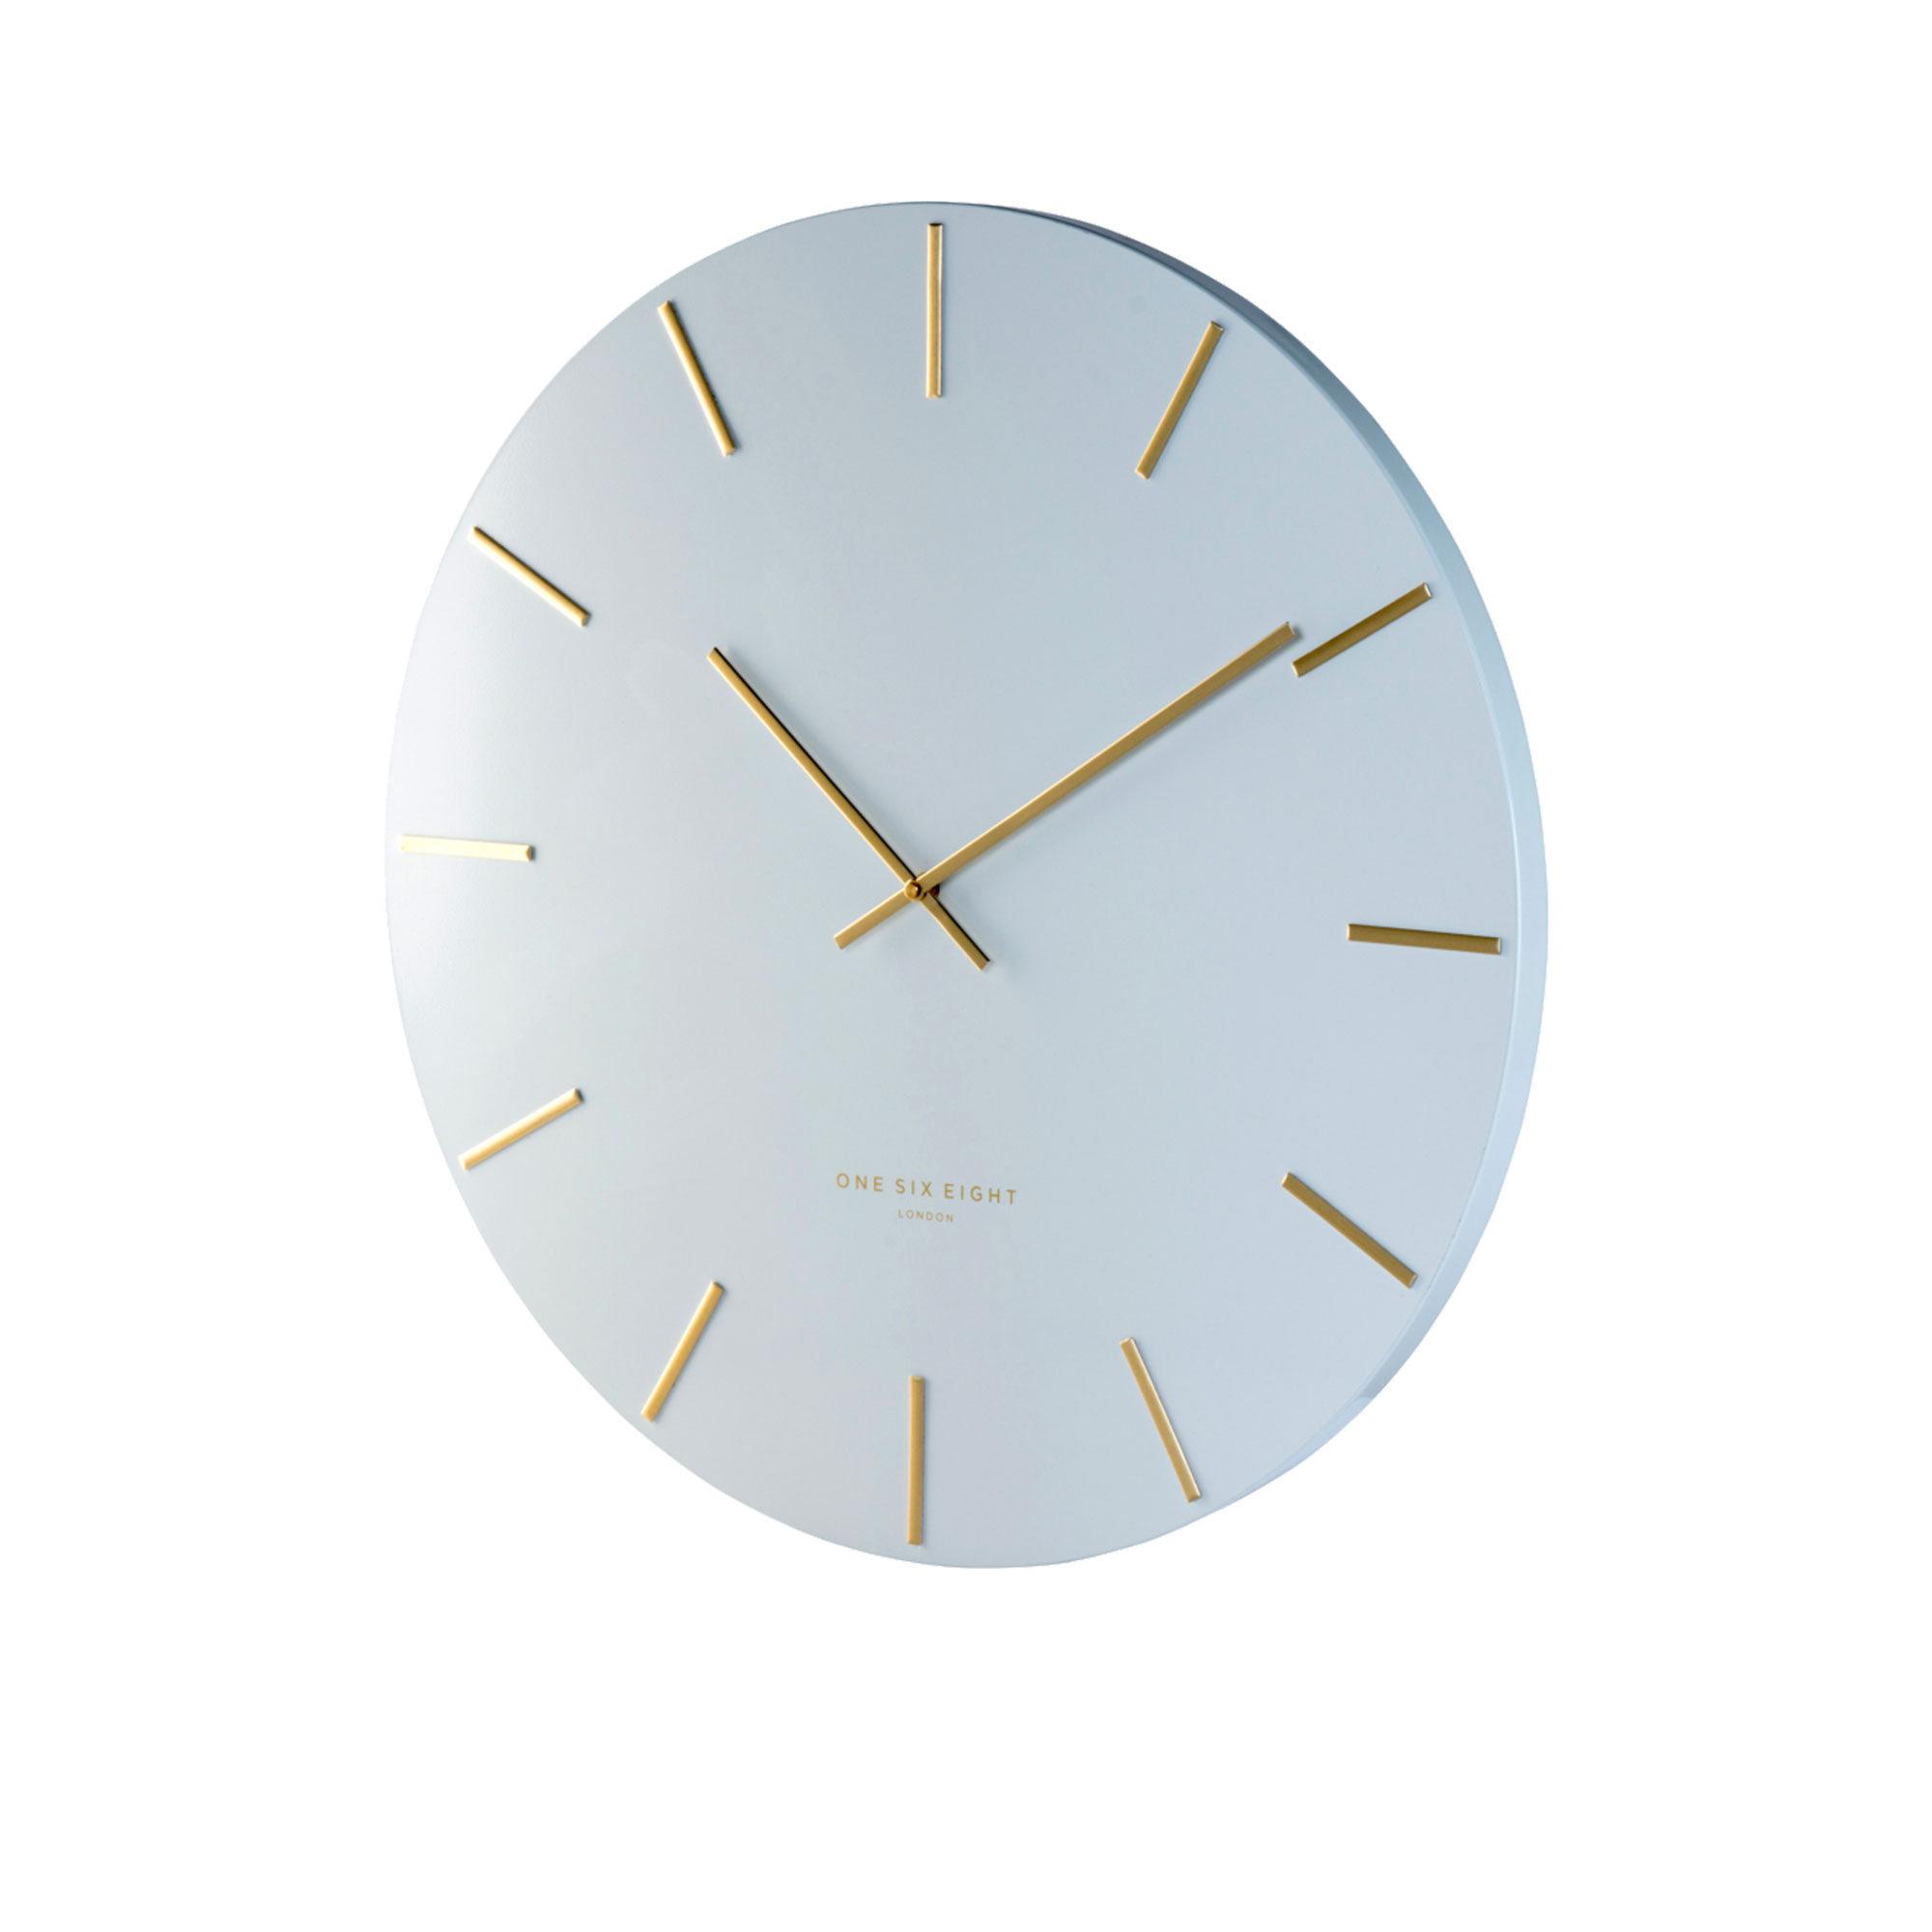 One Six Eight London Luca Silent Wall Clock 40cm White Image 3